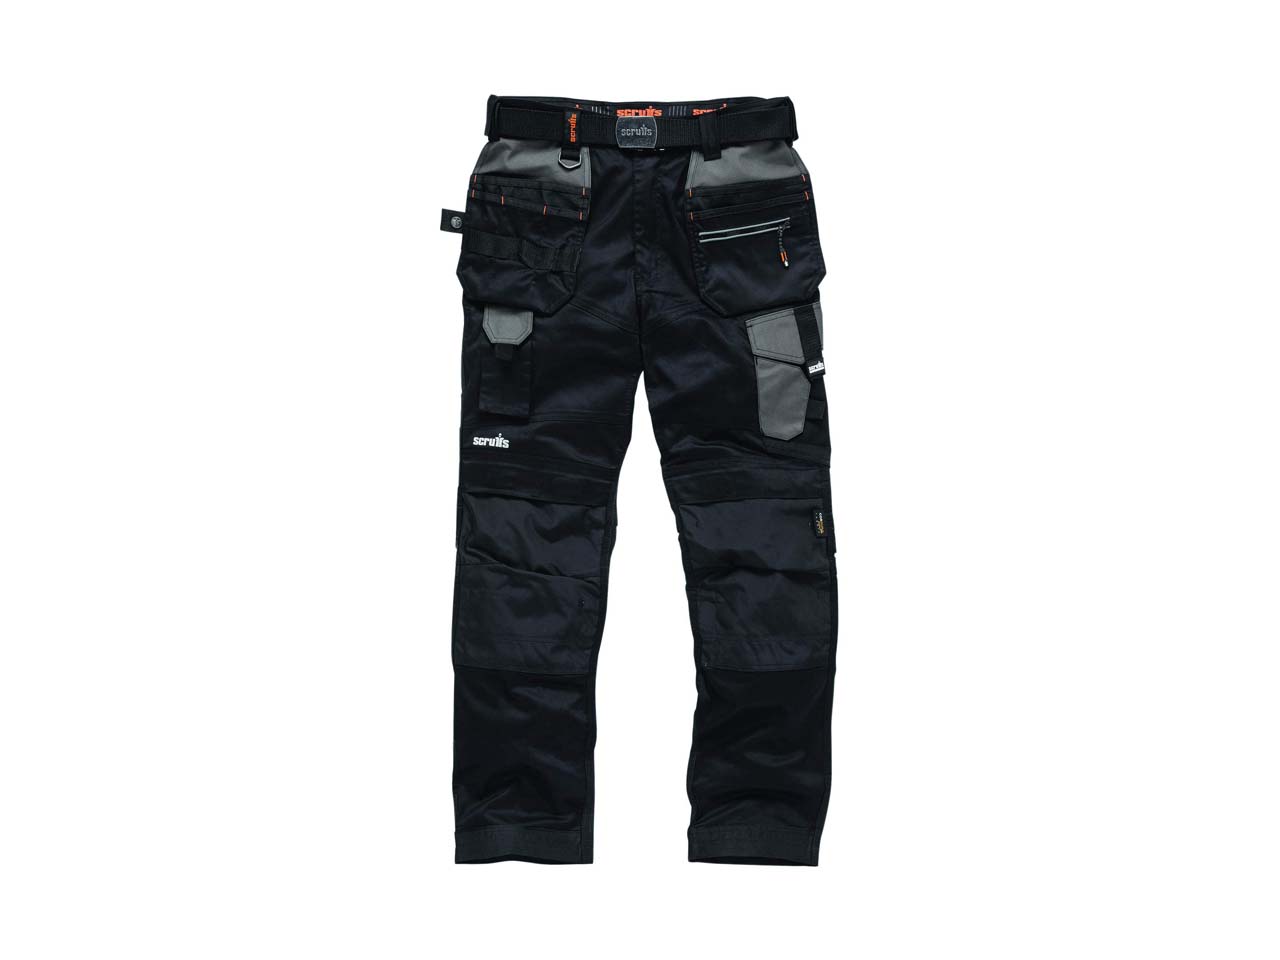 Heavy Duty Black Pro Work Trousers | Army & Navy Stores UK